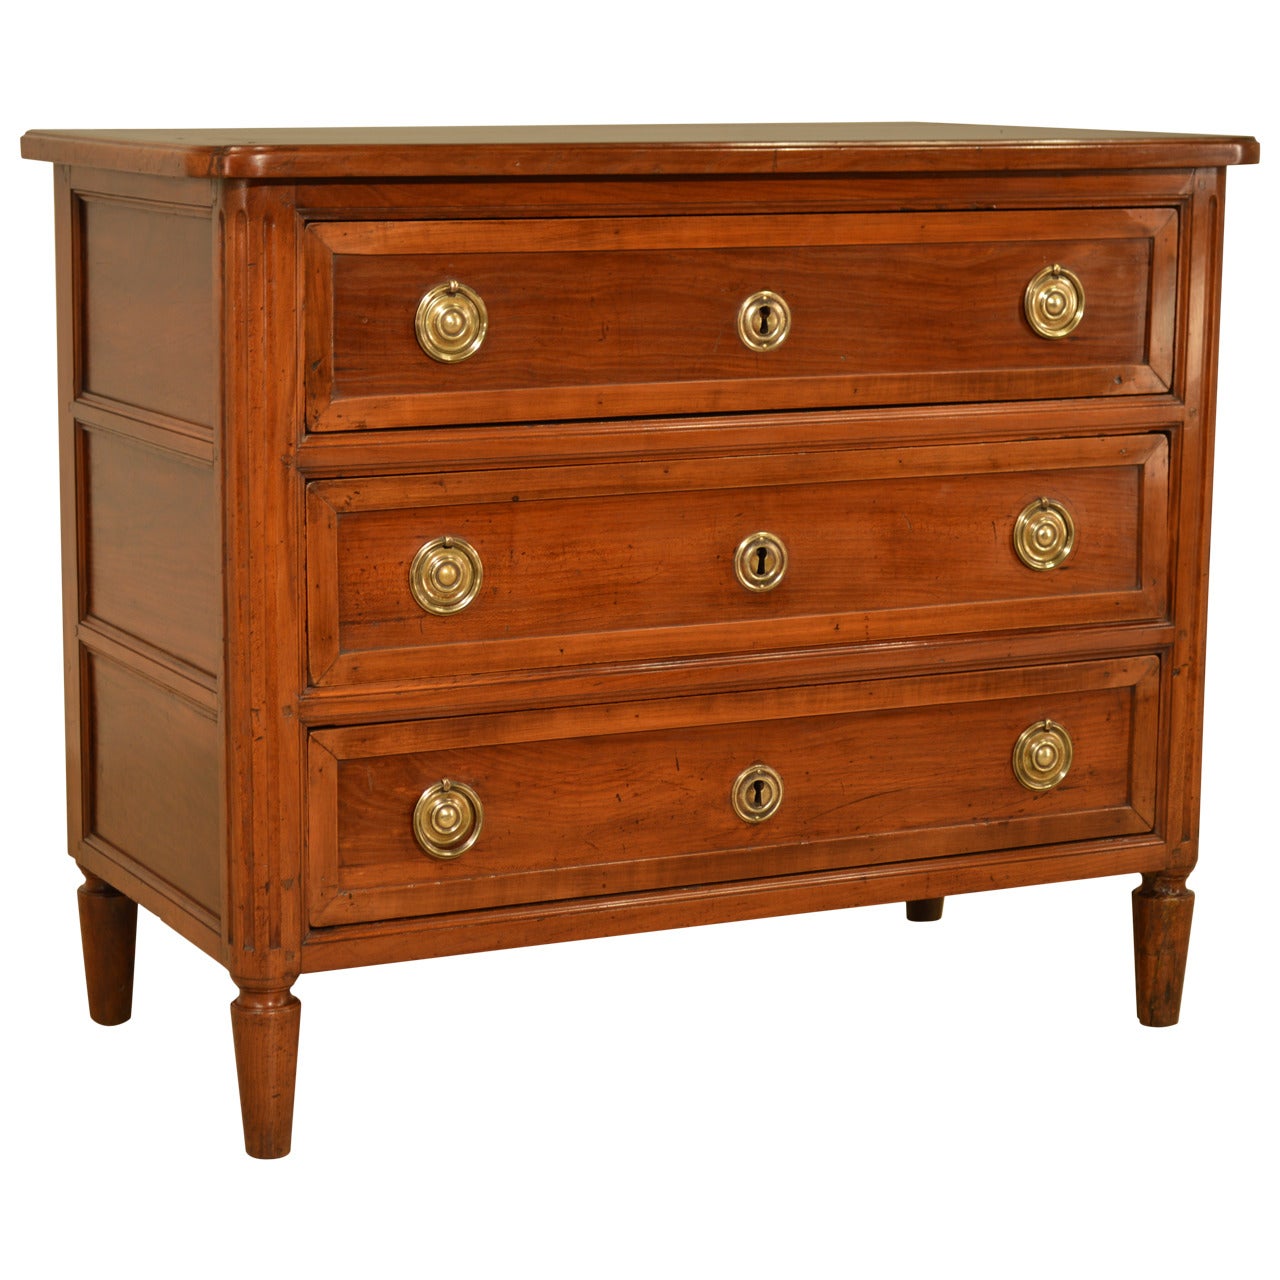 Late 19th Century French Directoire Walnut Commode